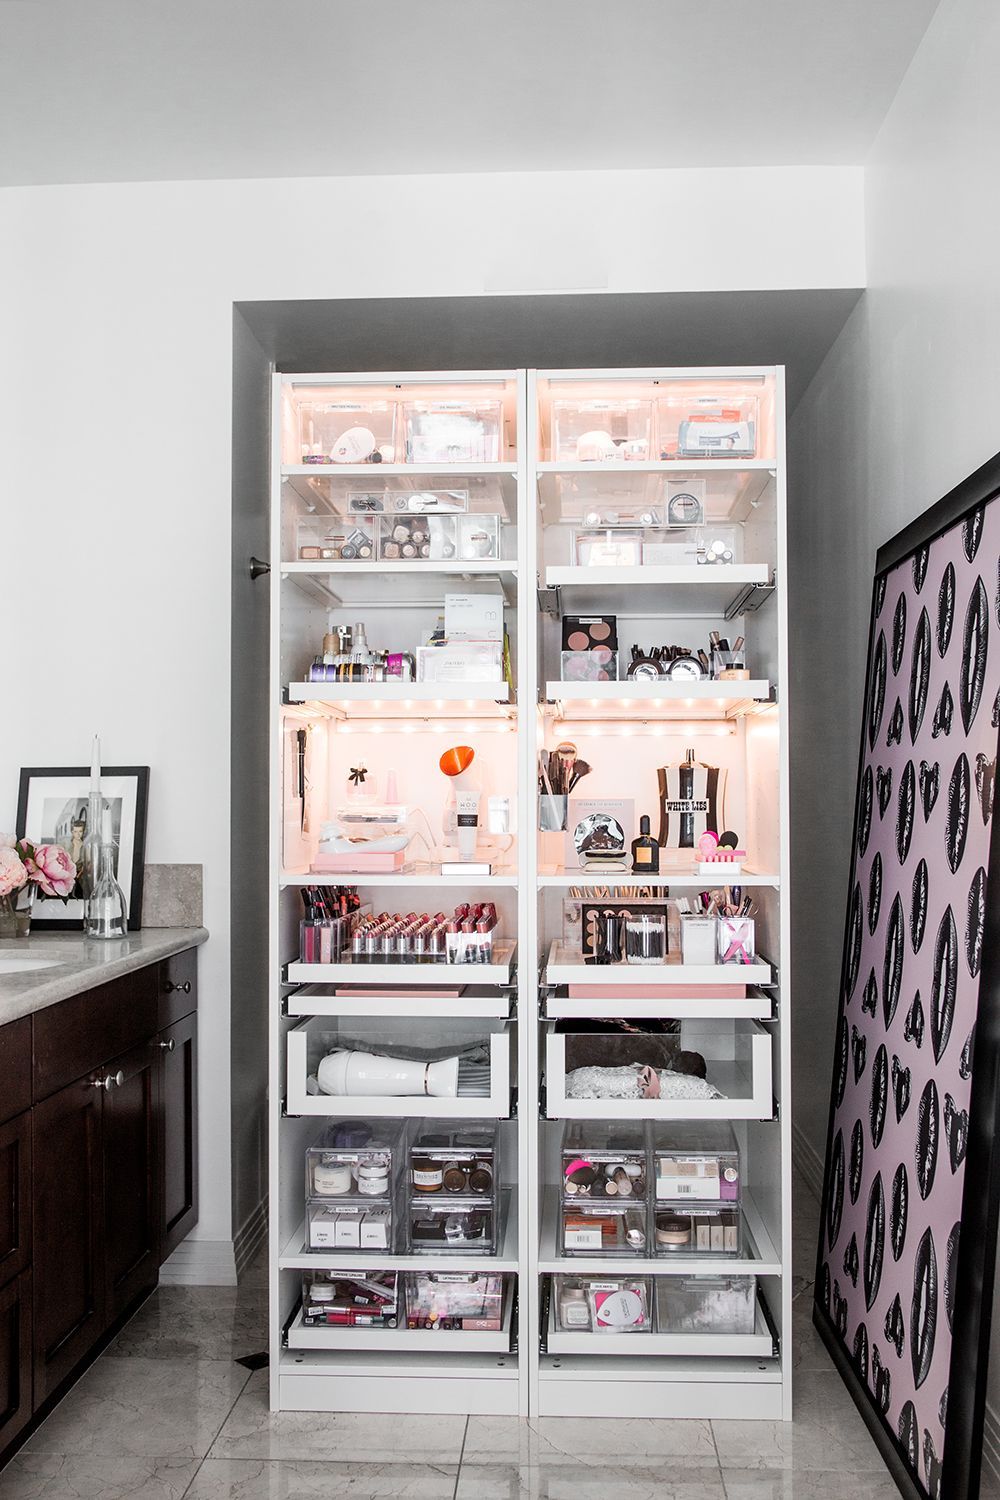 MY MAKEUP INSTALLMENT AND ORGANIZATION FT. DEUXALITI - MY MAKEUP INSTALLMENT AND ORGANIZATION FT. DEUXALITI -   18 beauty Room storage ideas